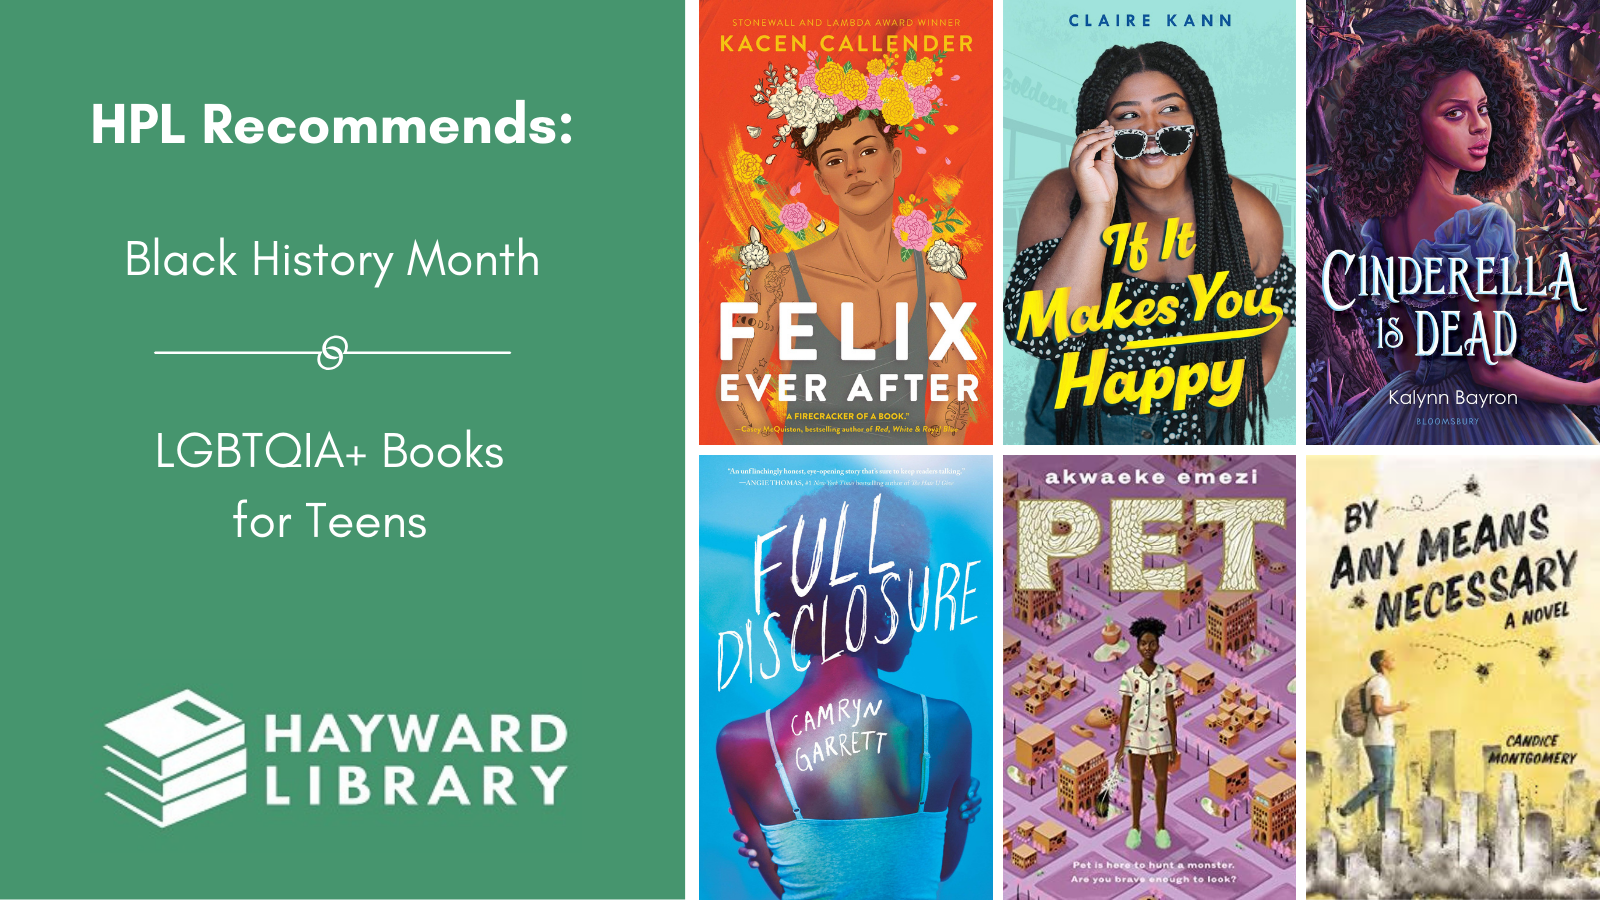 Collage of book covers with a green block on left side that says HPL Recommends, Black History Month, LGBTQIA+ Books for Teens in white text, with Hayward Library logo below it.